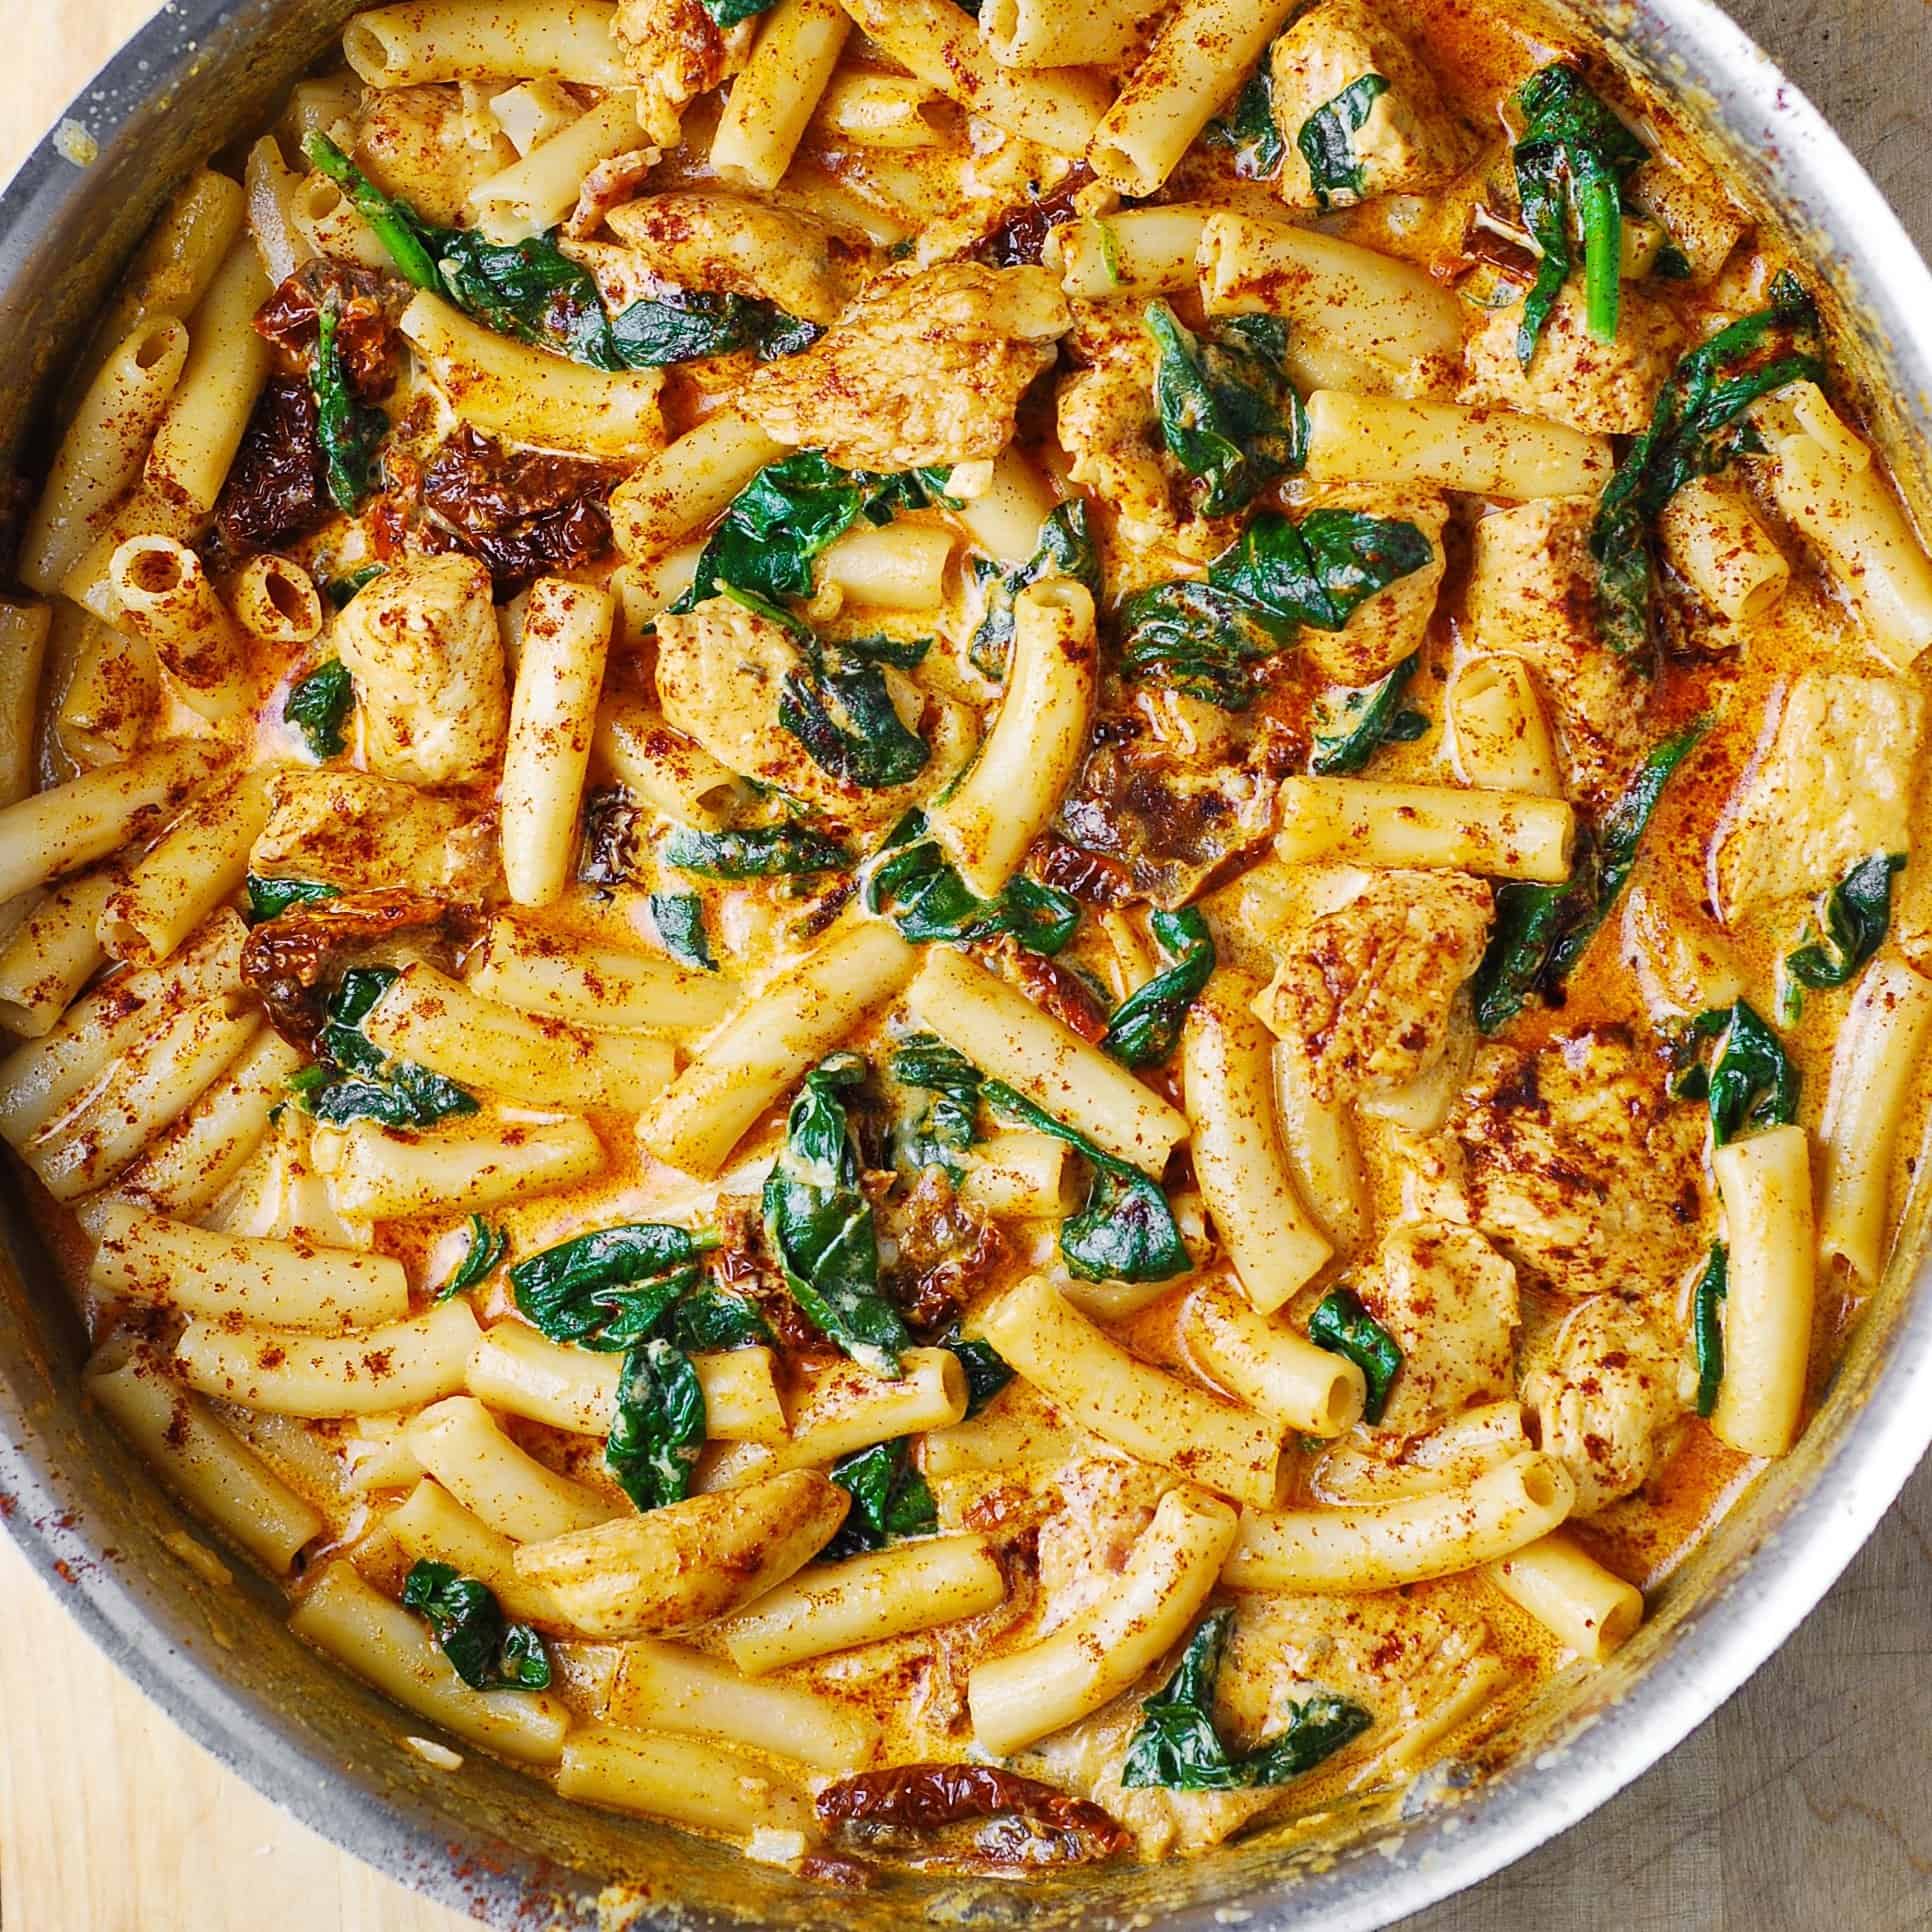 Asiago Chicken Pasta with Spinach and Sun-Dried Tomatoes - in a stainless steel pan.